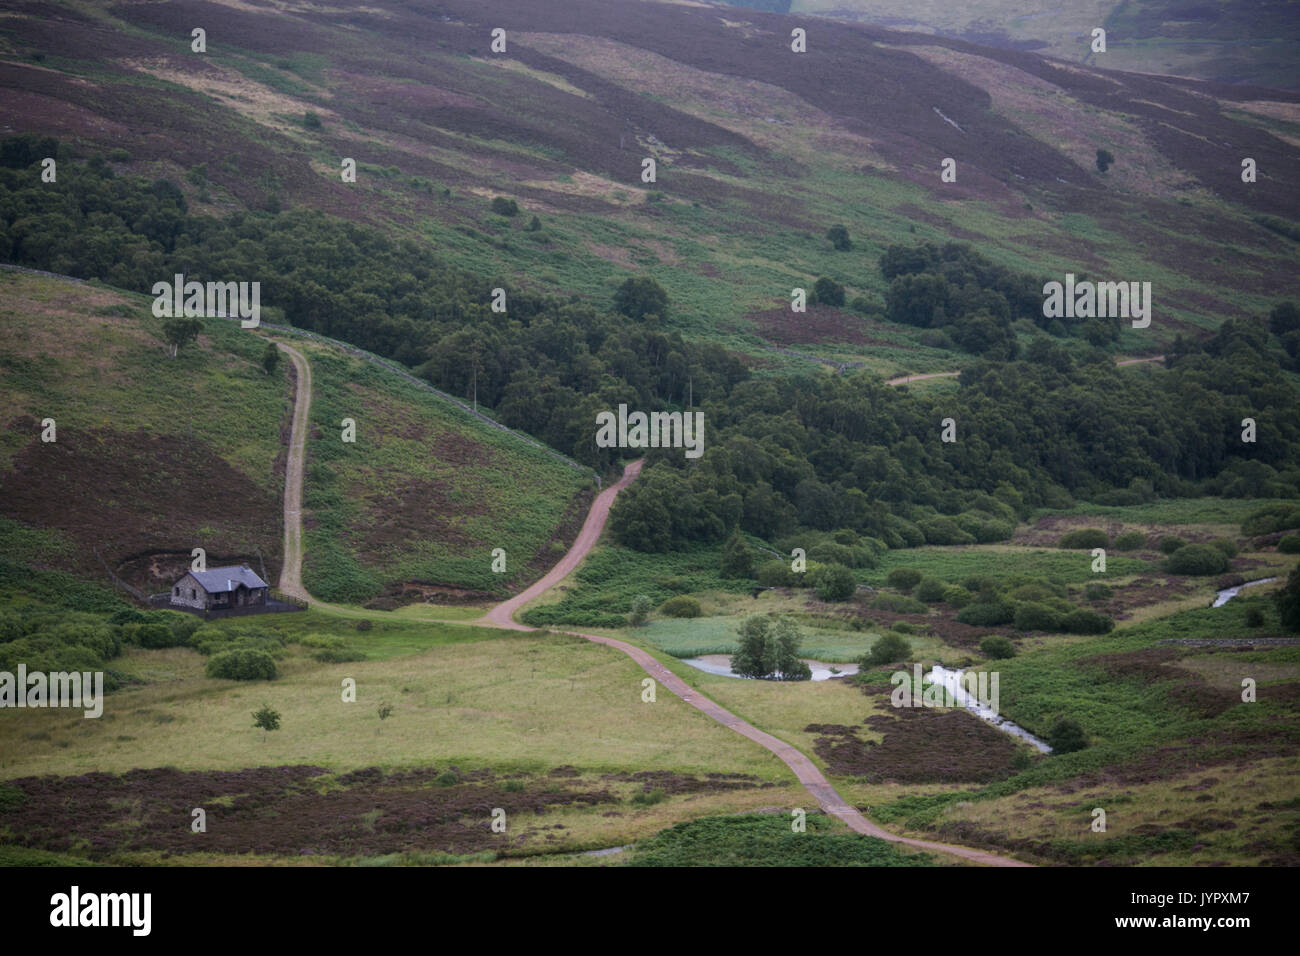 The view of moorland in the Borders of Scotland. The hills are popular hunting ground for grouse. Stock Photo